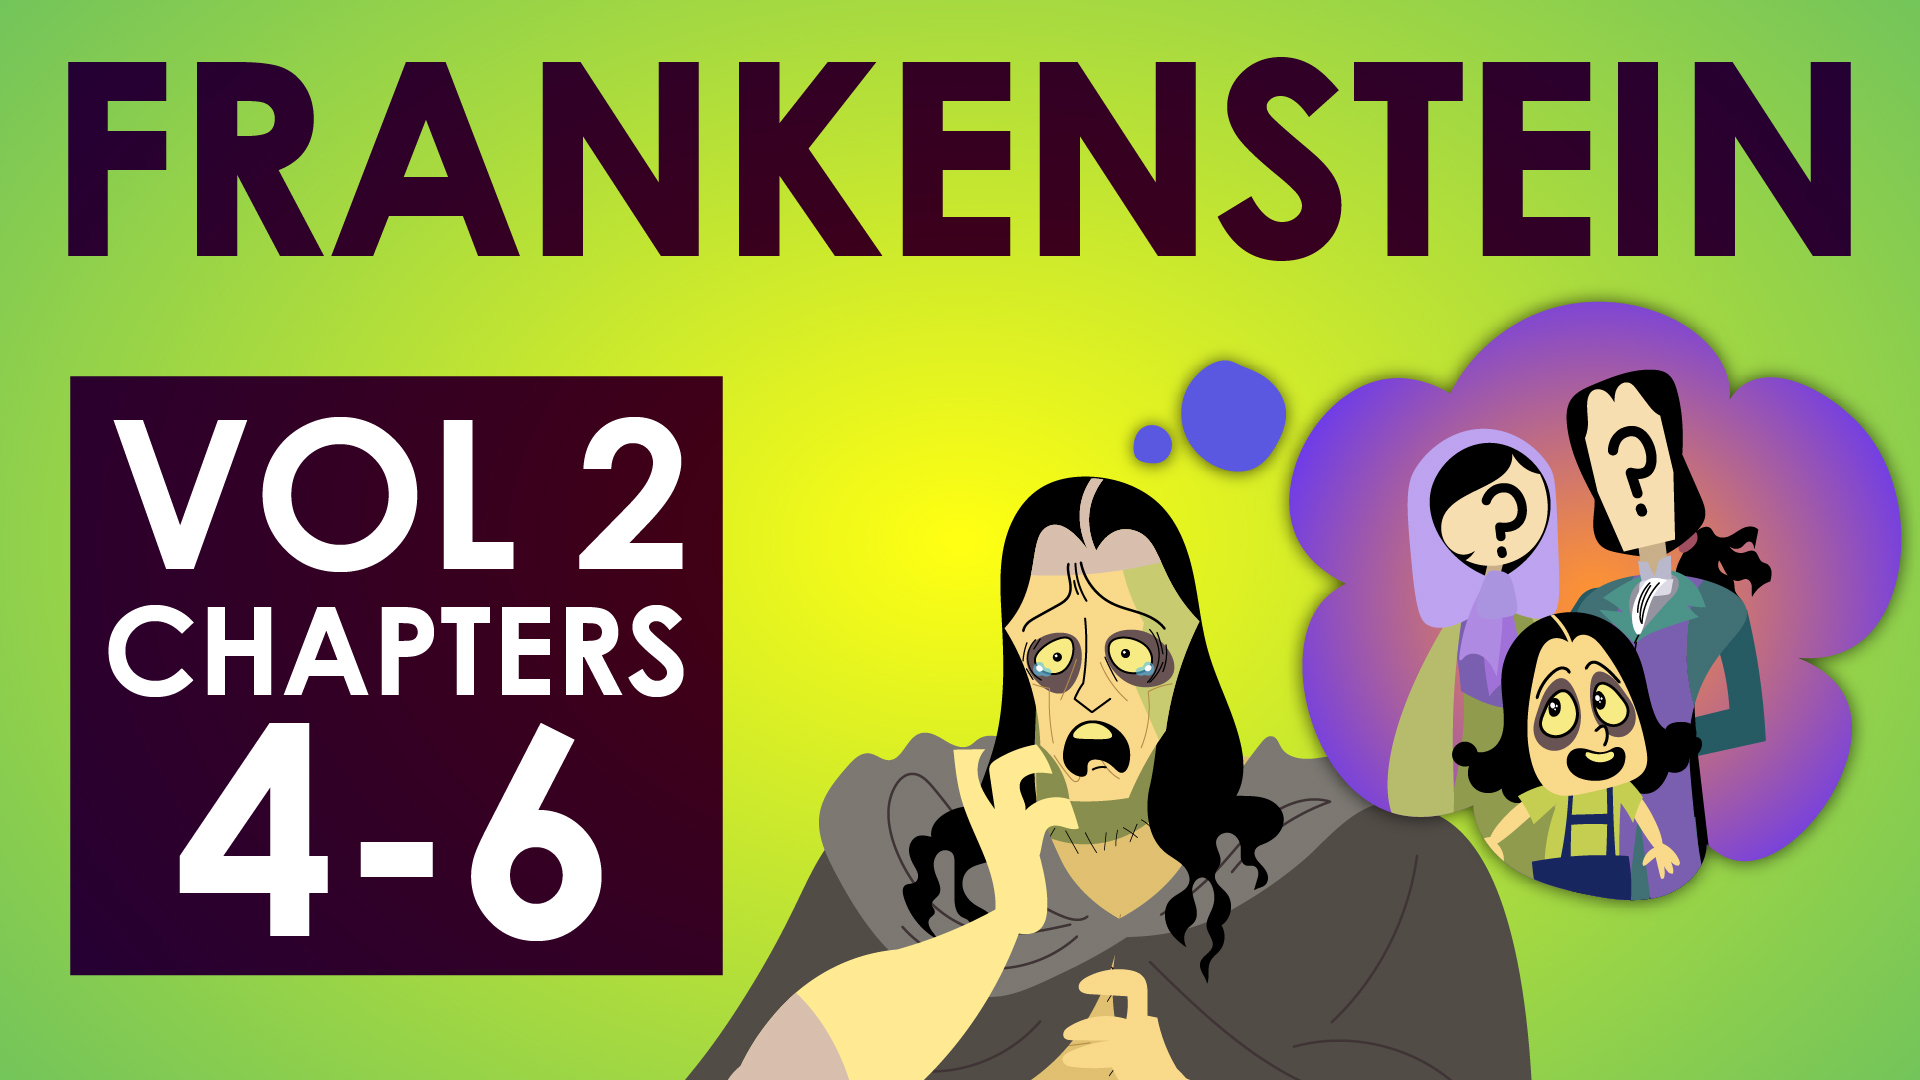 Frankenstein - Mary Shelley - Volume 2 Chapters 4-6 - Powering Through Prose Series